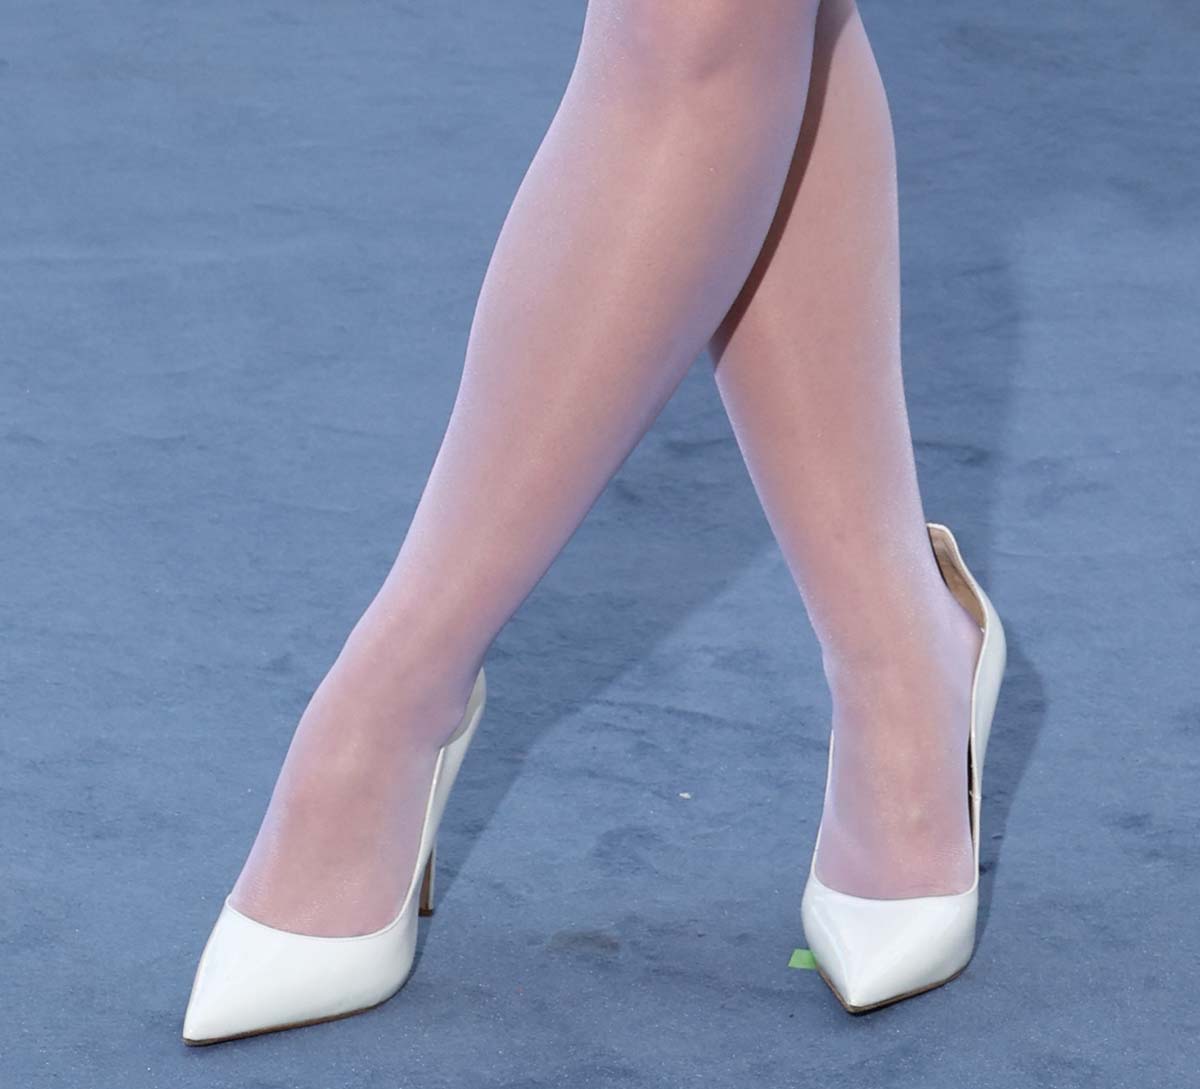 Joey King teams her futuristic white dress with white stockings and white patent Le Silla Ivy pumps